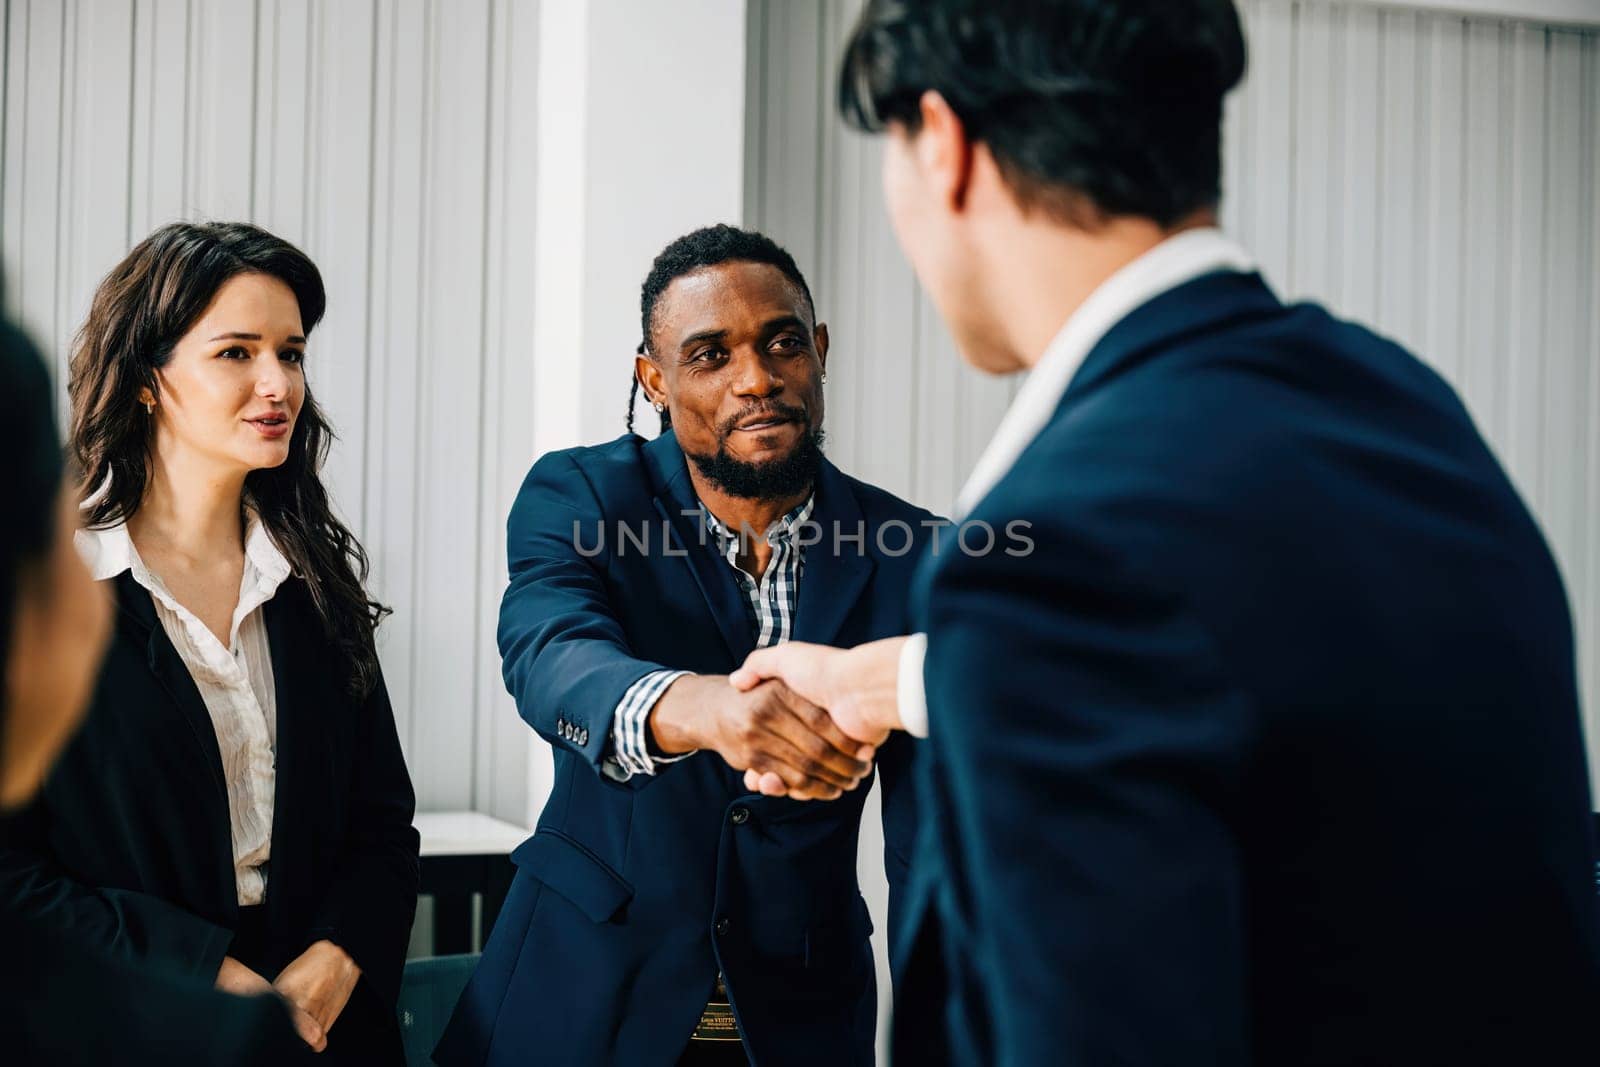 Close-up of a handshake between a young manager and a new employee, symbolizing success and collaboration in their business partnership. Men shake hands during a leadership meeting.